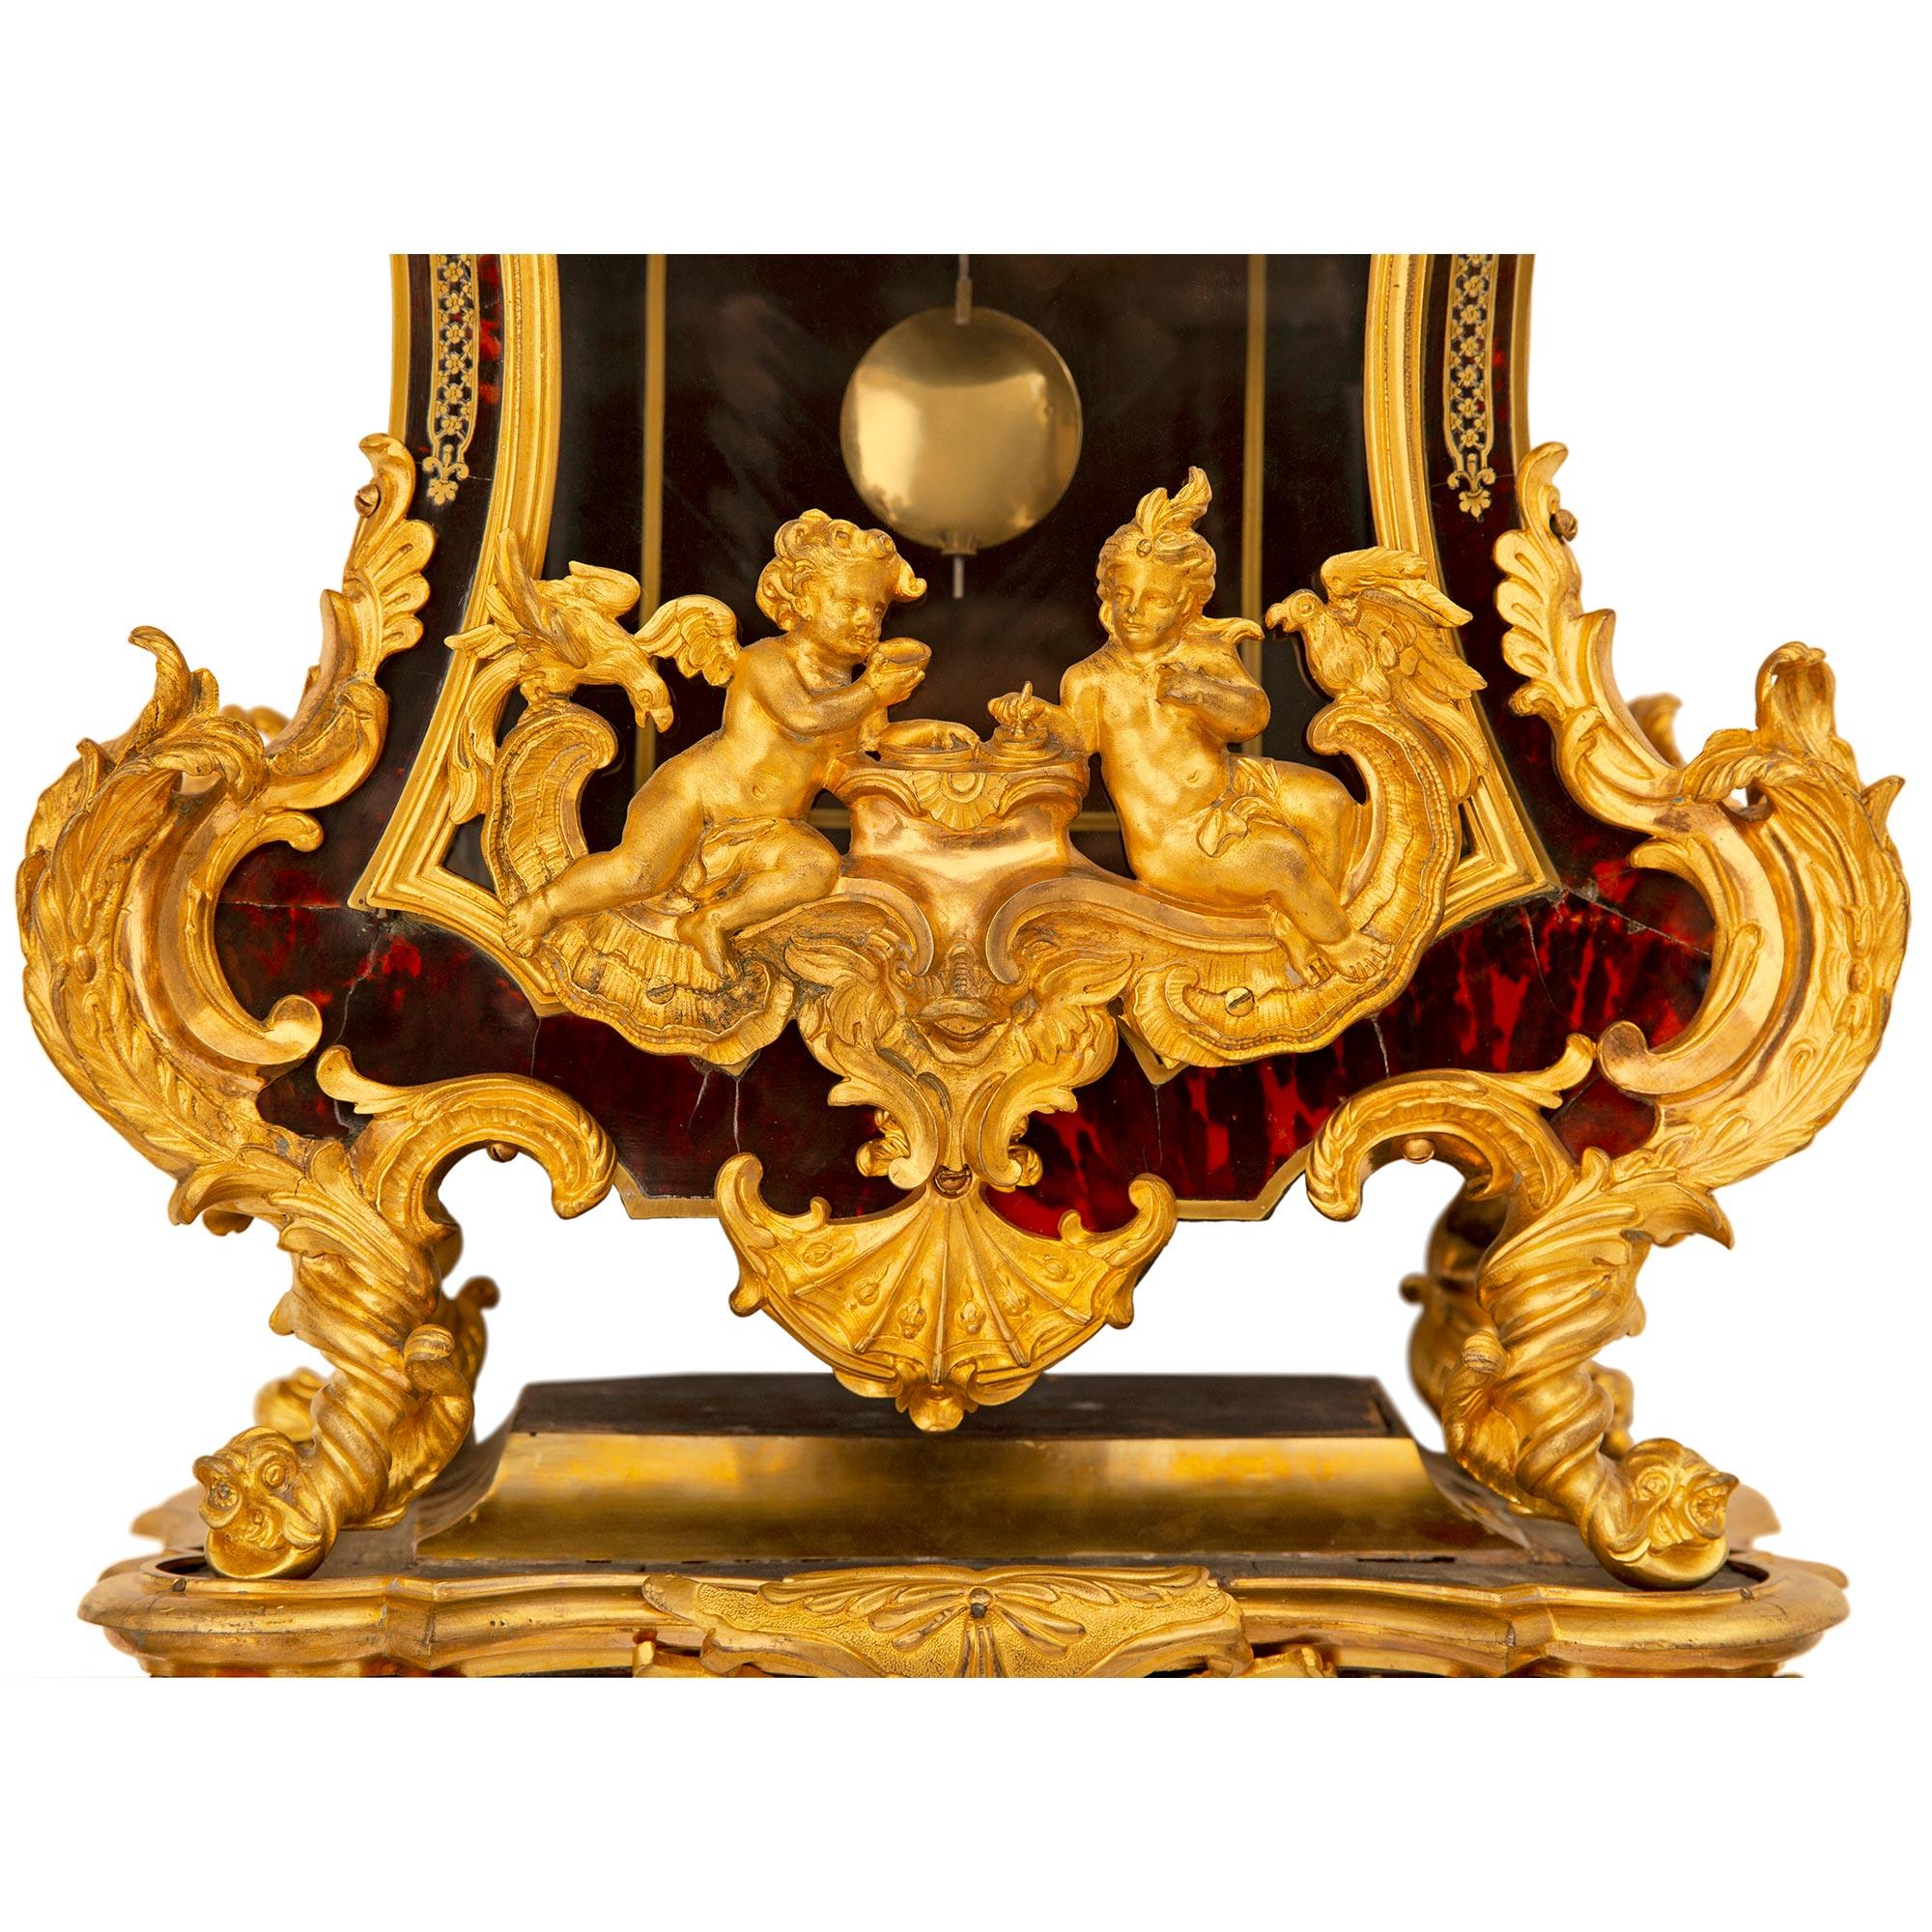 French Early 18th Century Louis XV Period Tortoise Shell and Ormolu Cartel Clock For Sale 2